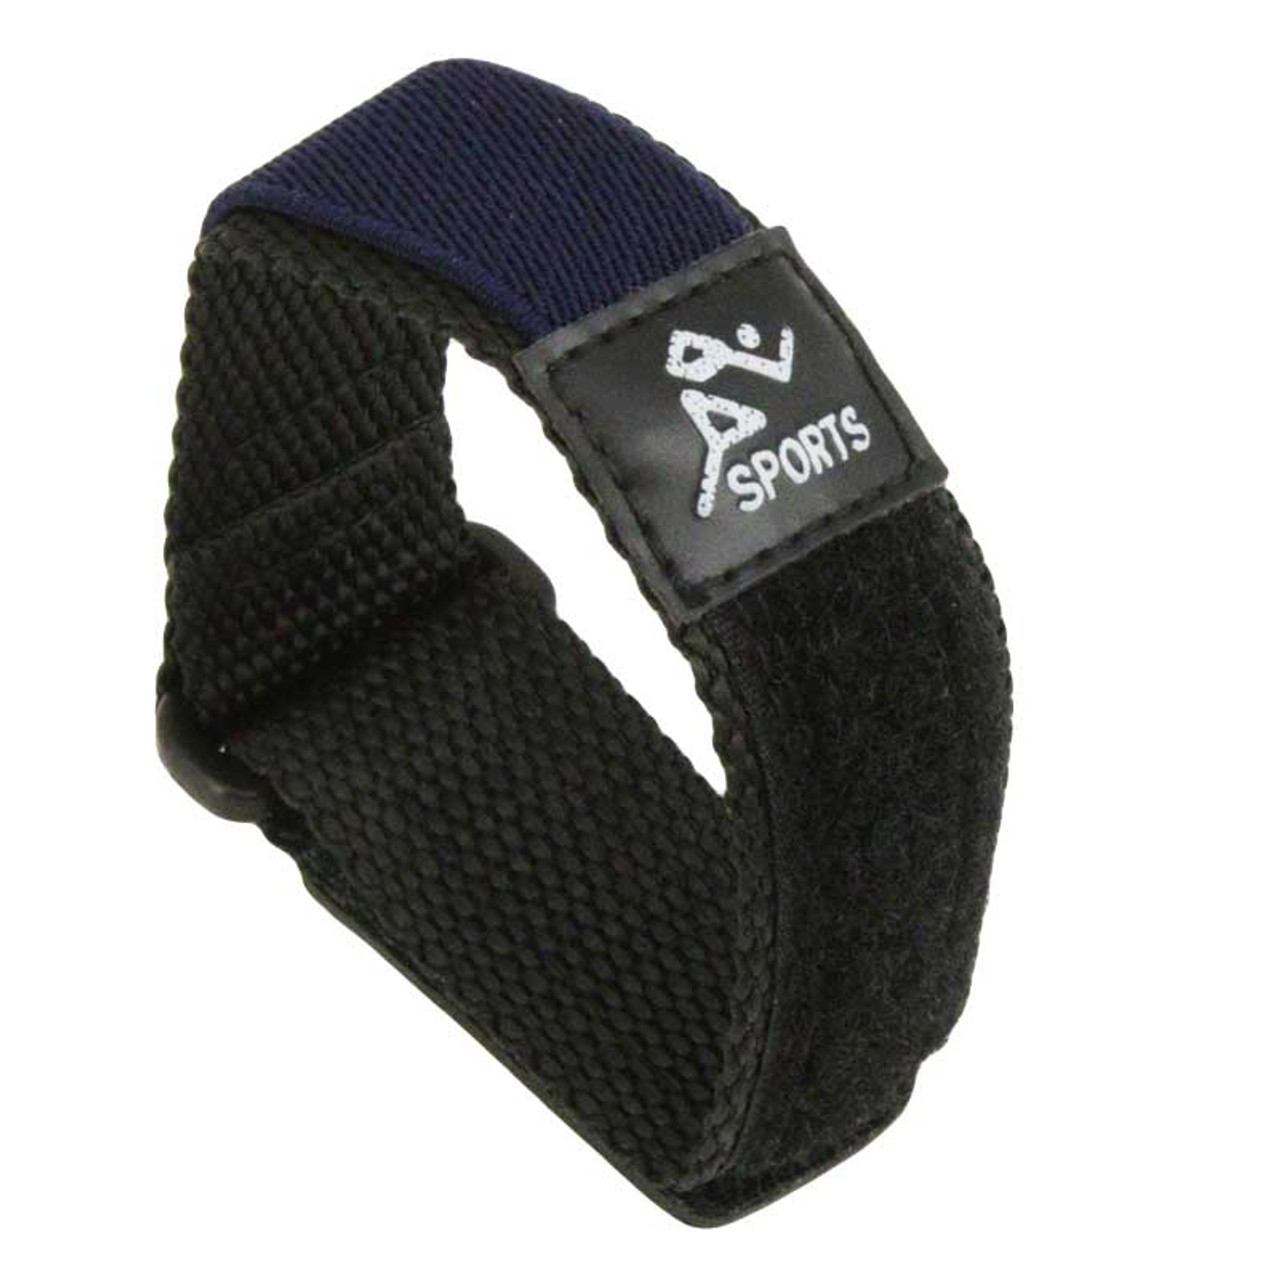 Buy Velcro Watch Strap Online In India - Etsy India